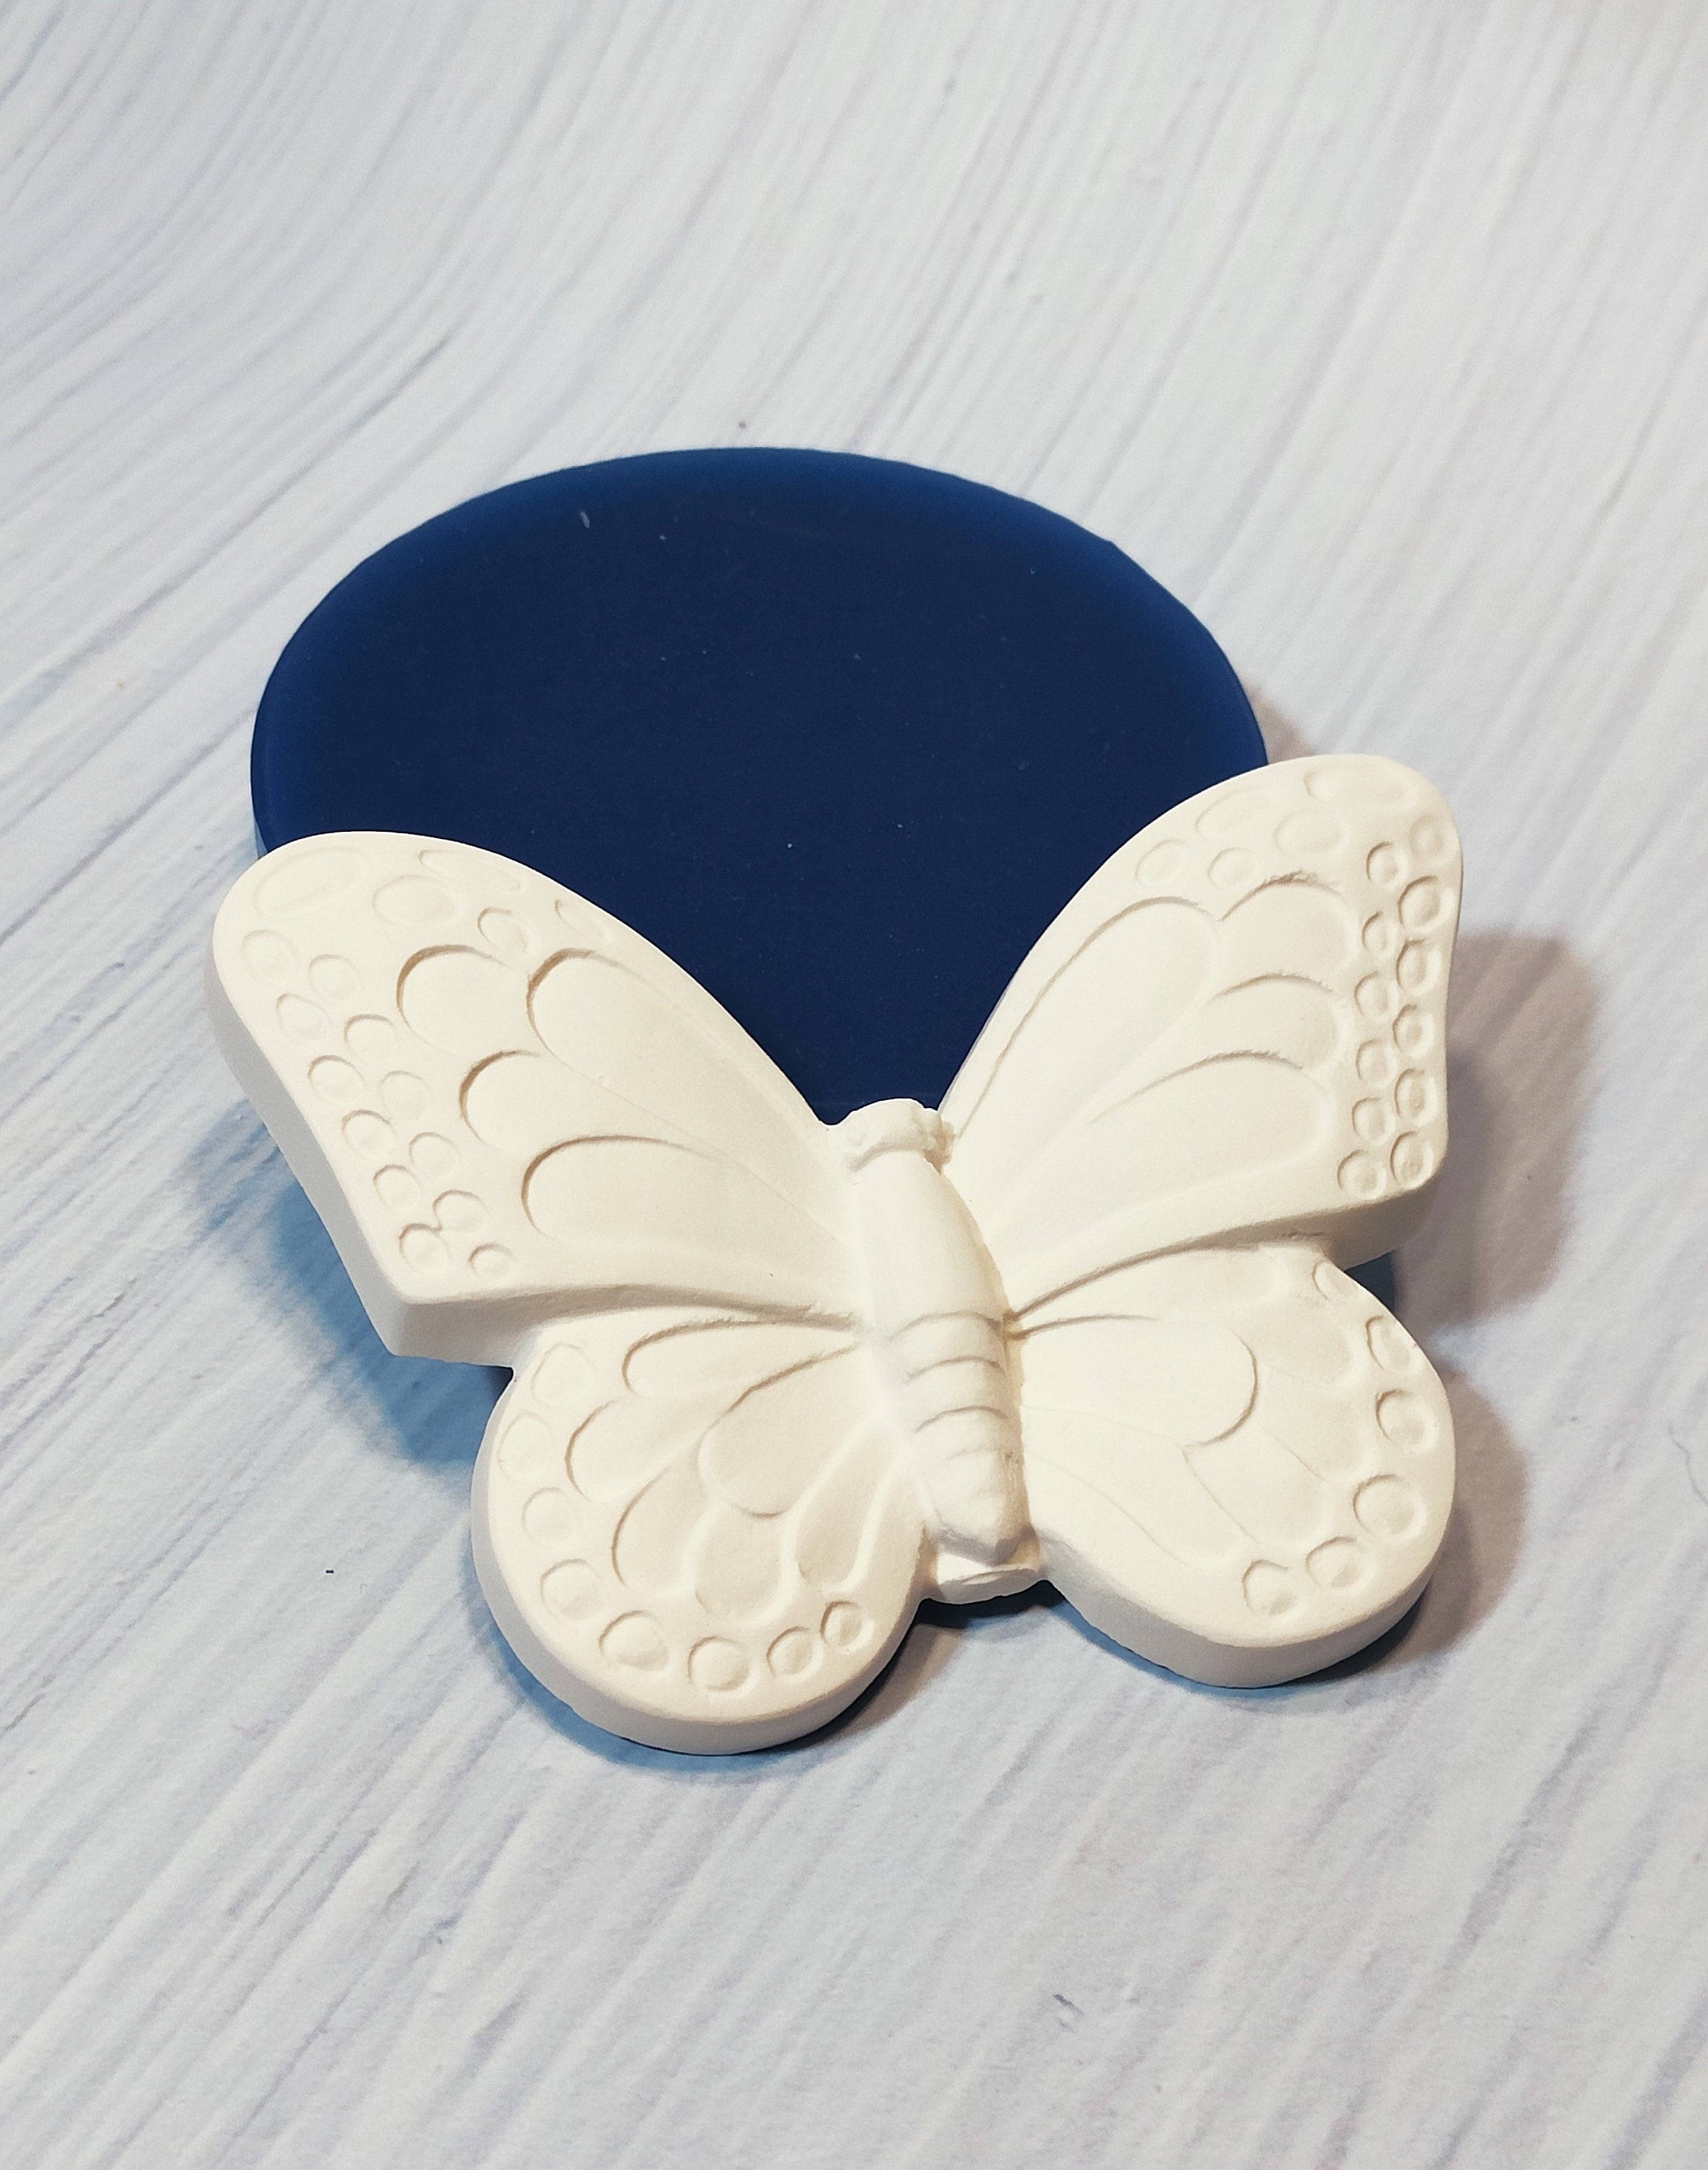 BUTTERFLY Silicone Mold (Code 116)